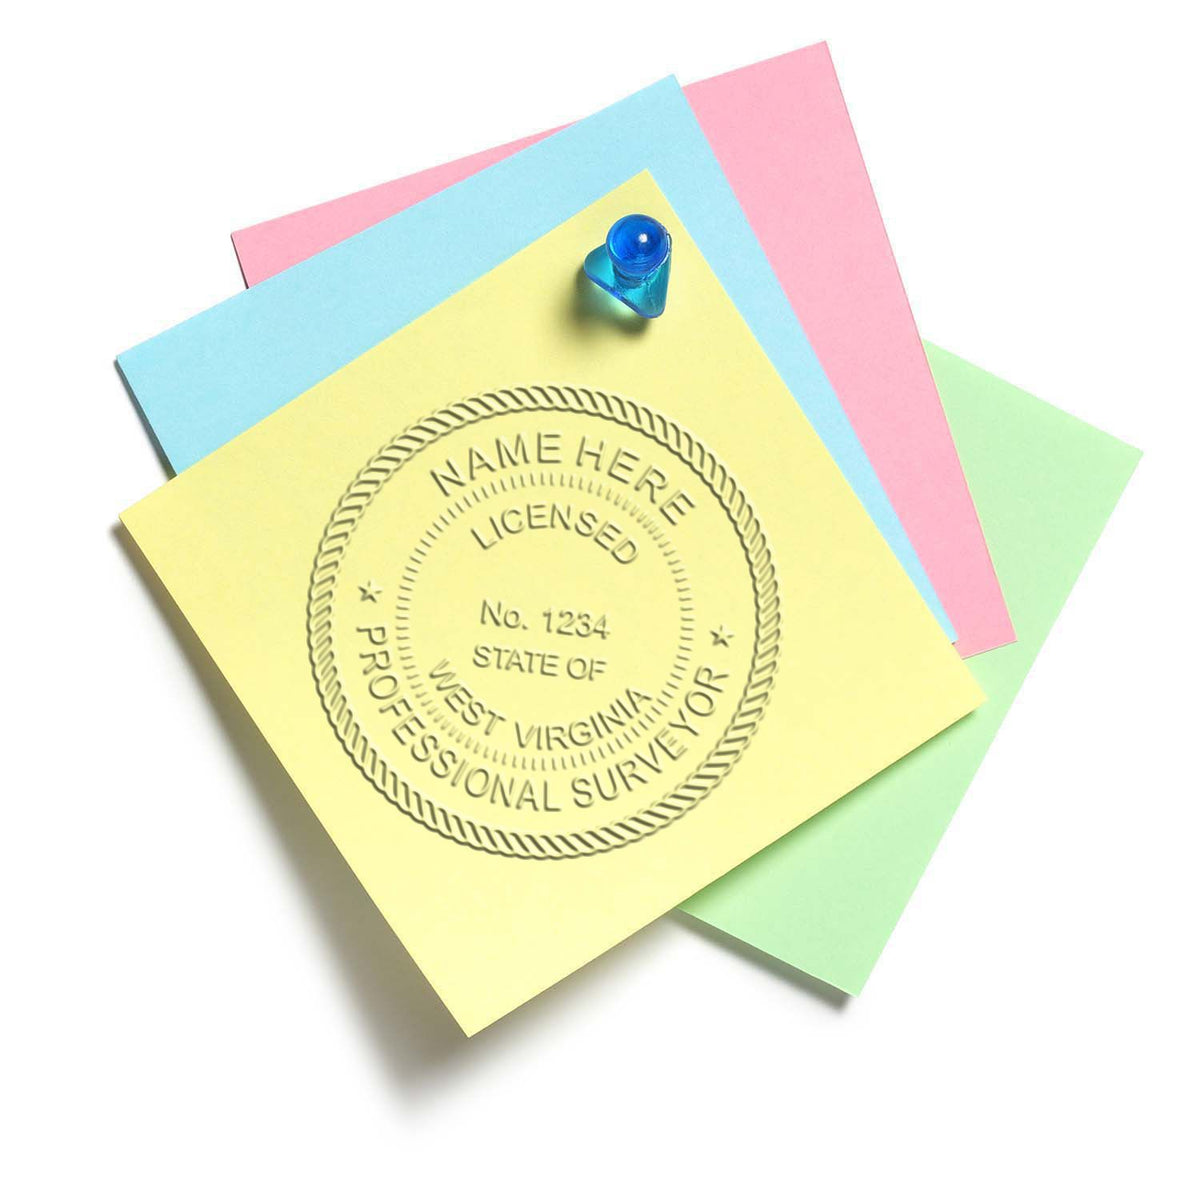 An in use photo of the Gift West Virginia Land Surveyor Seal showing a sample imprint on a cardstock